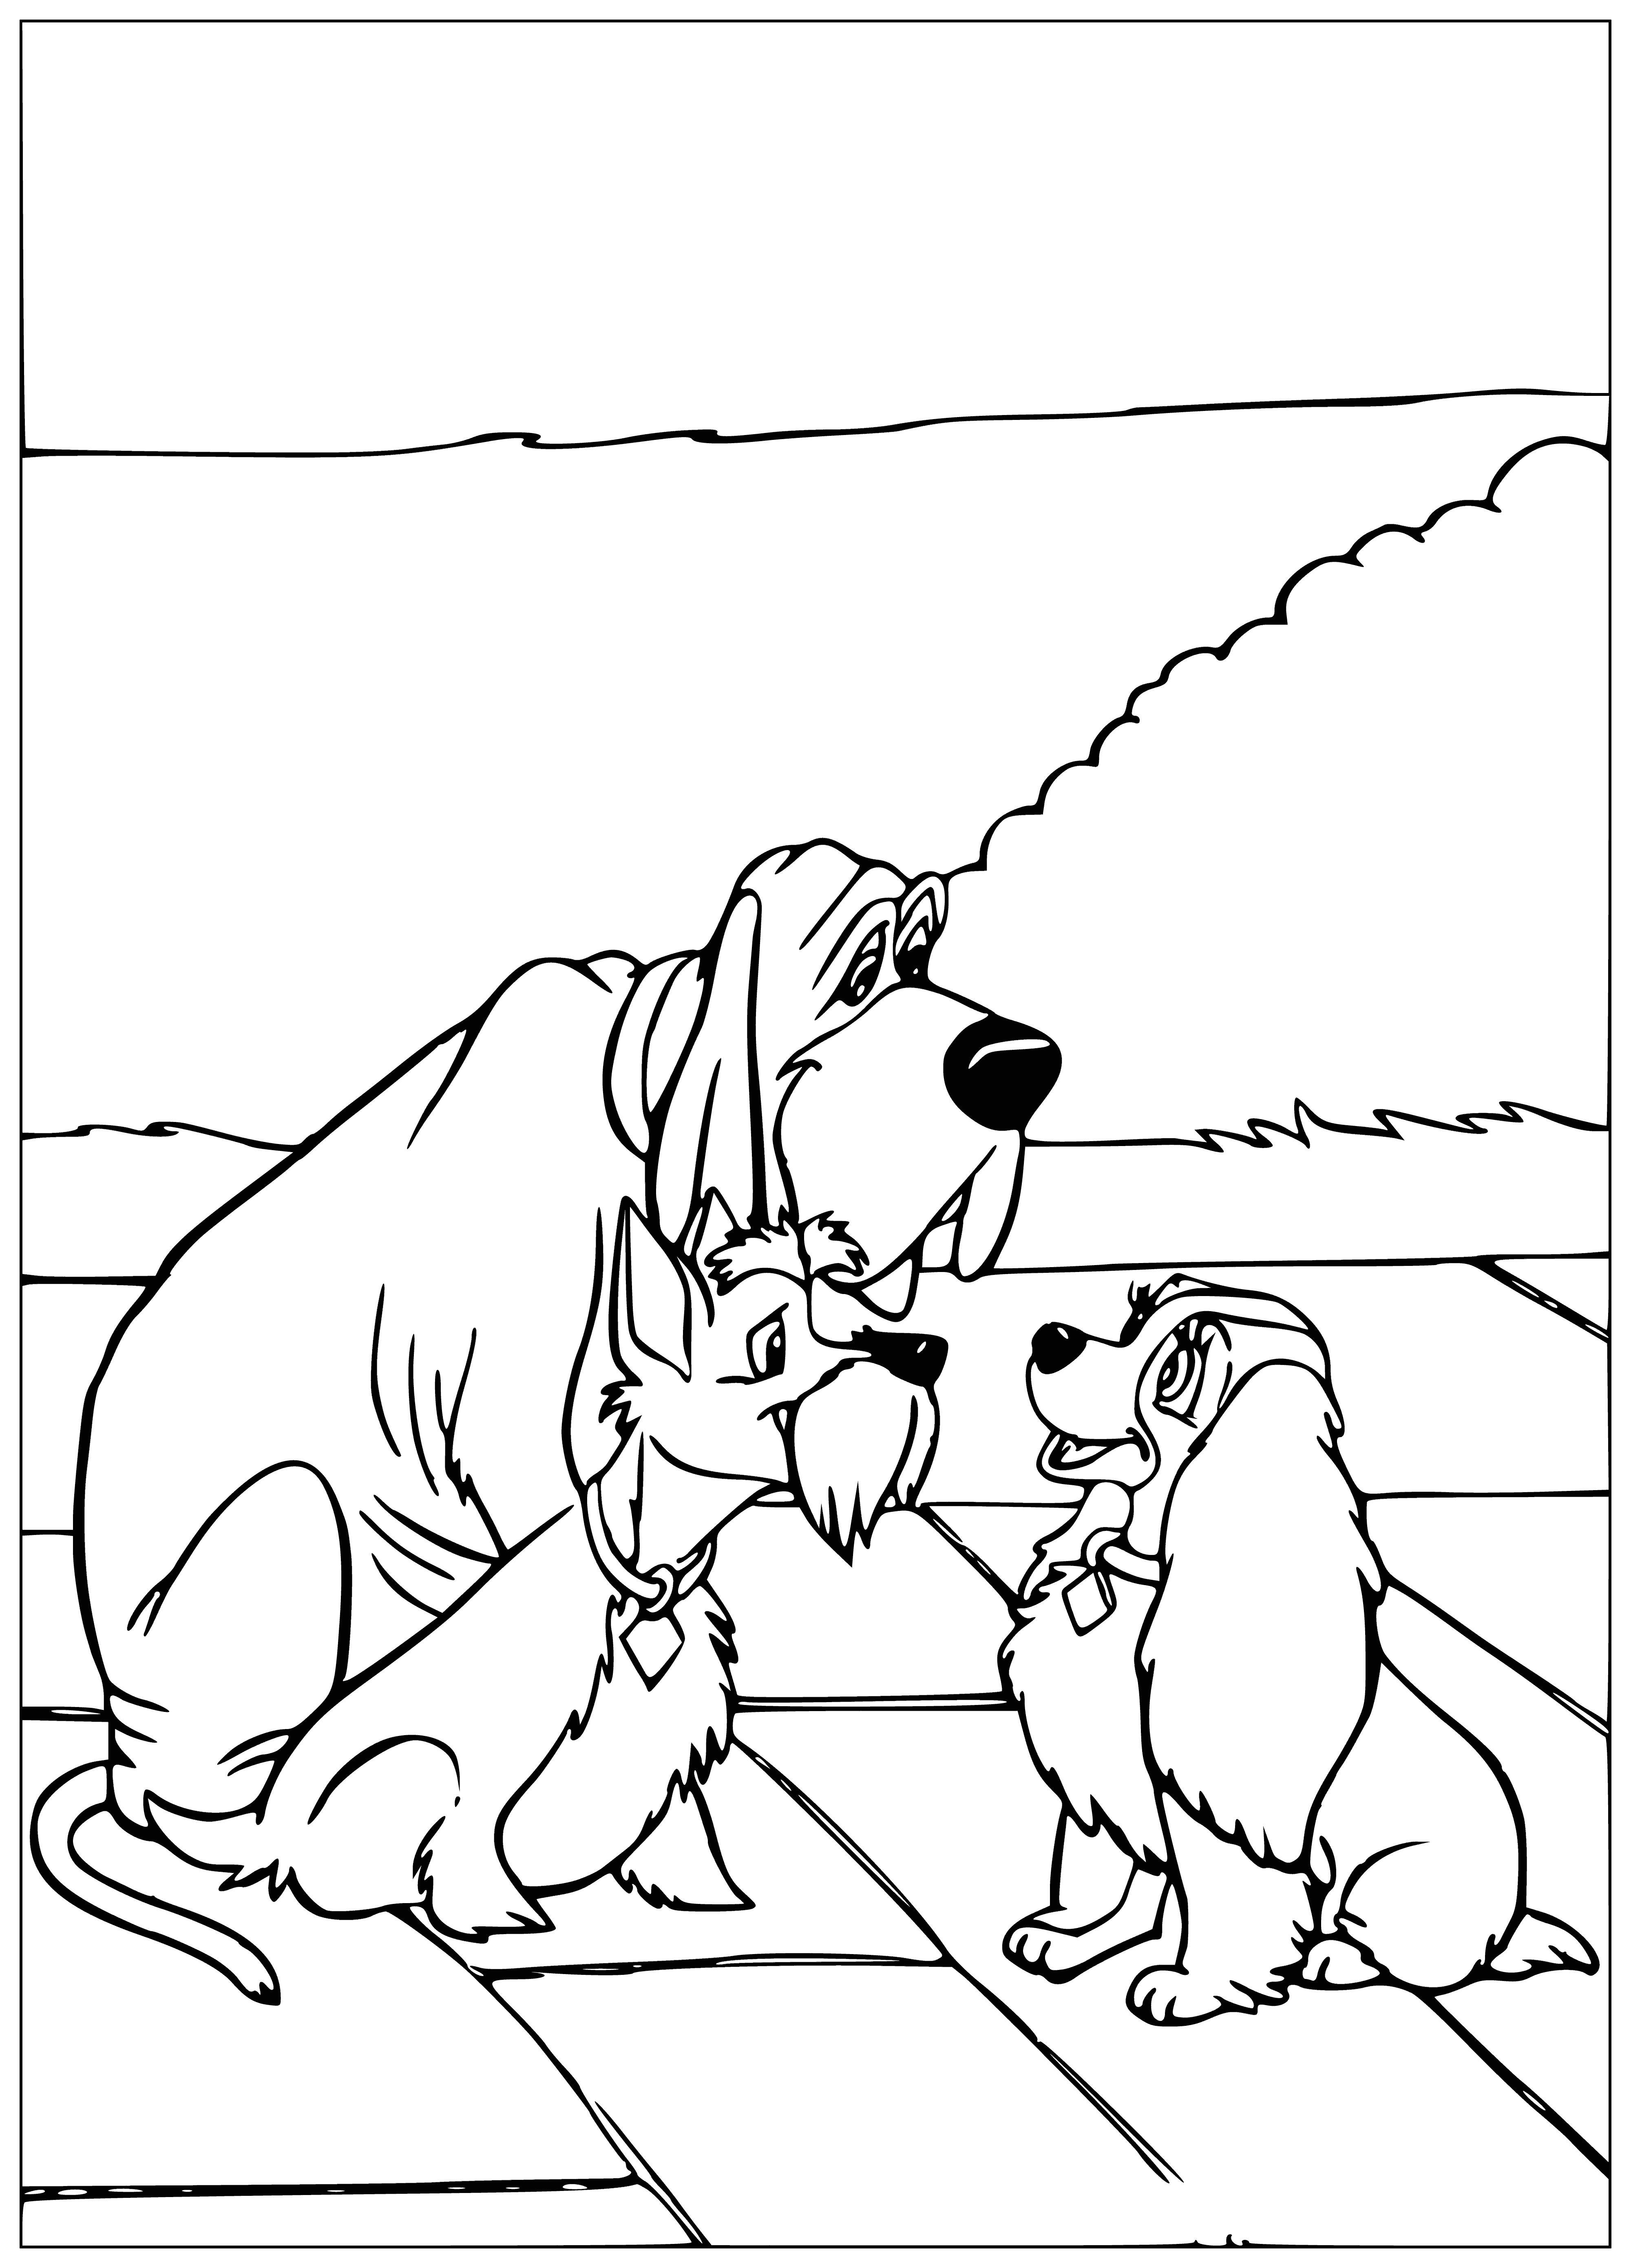 coloring page: Two dogs meet, a lady dog with a collar and a tramp dog with none, but there's a longing in the air.